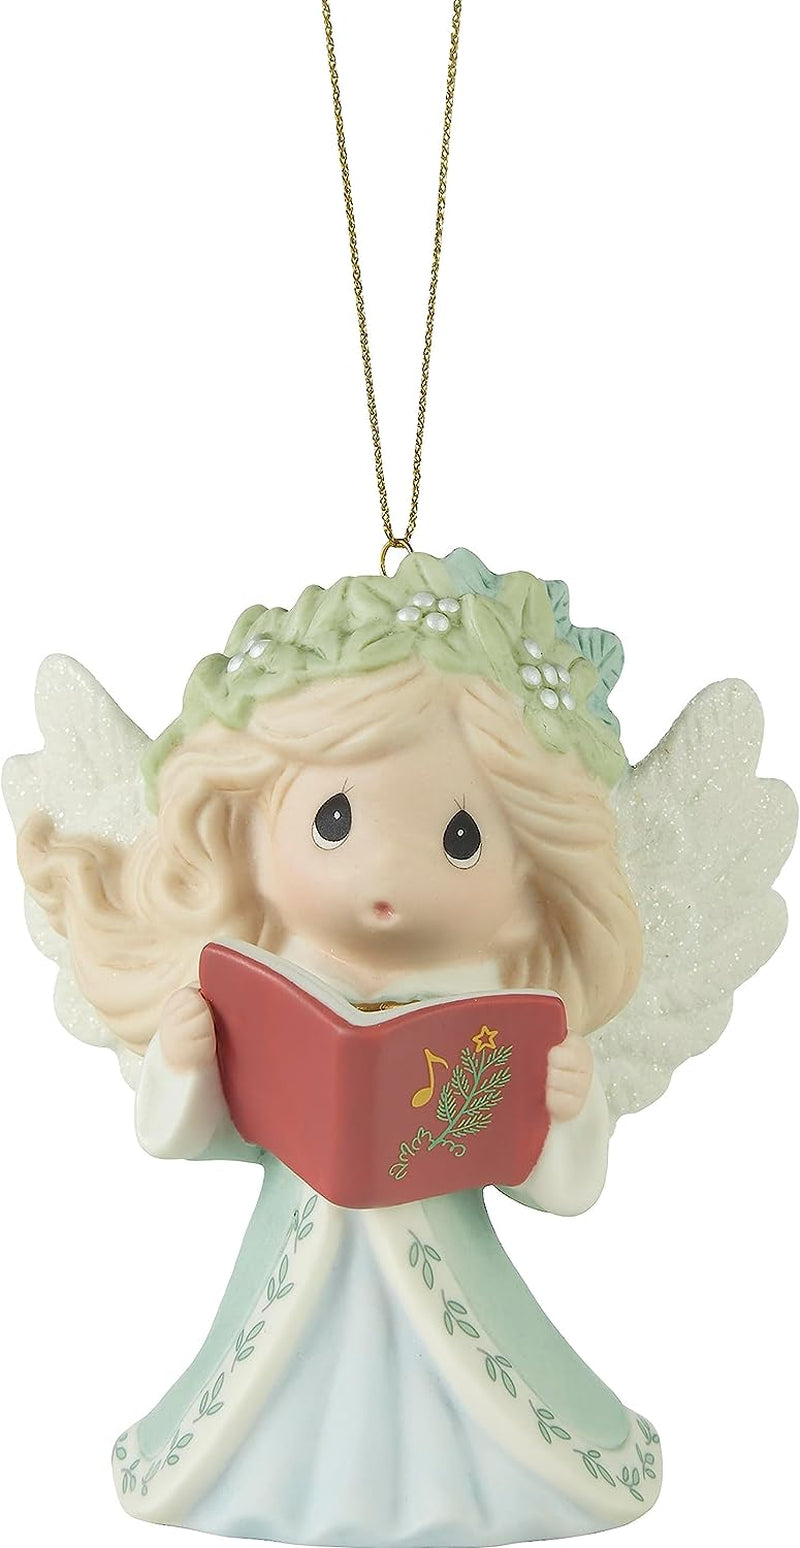 Precious Moments 231018 Wishing You Joyful Sounds of the Season Annual Angel Bisque Porcelain Ornament